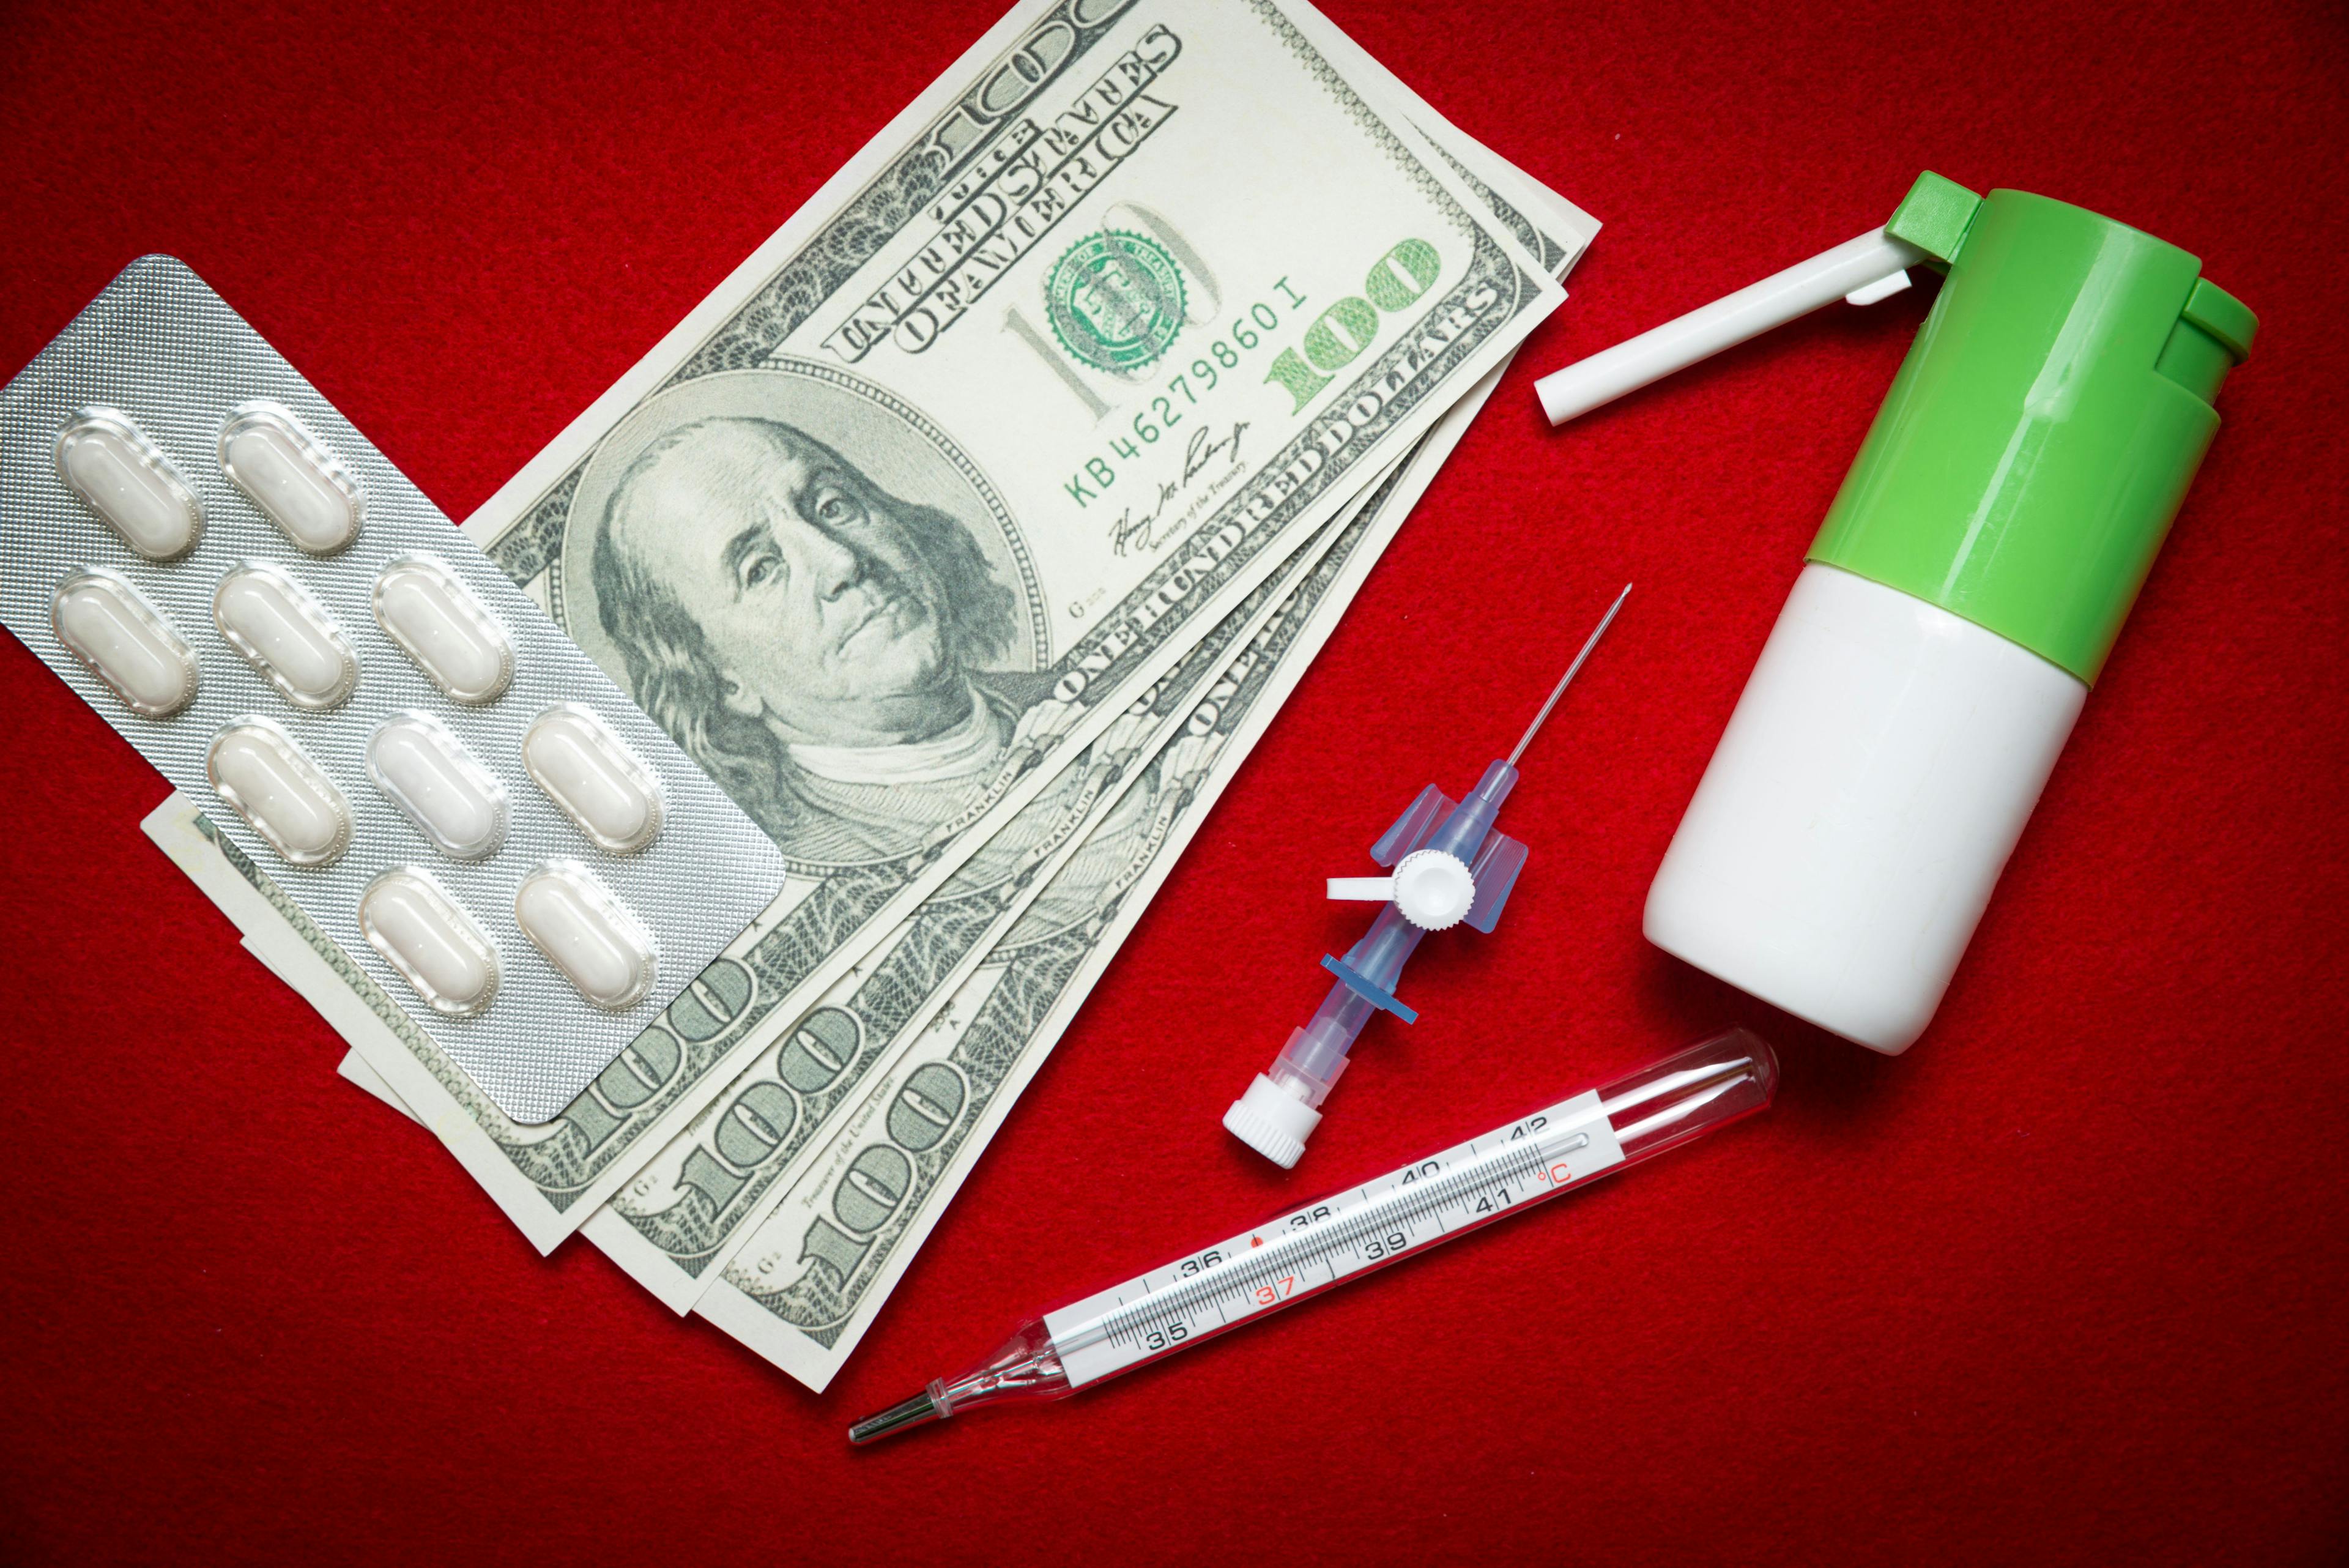 Pills, thermometer, inhaler and money on a red background | Image Credit: ©Sebastian - stock.adobe.com